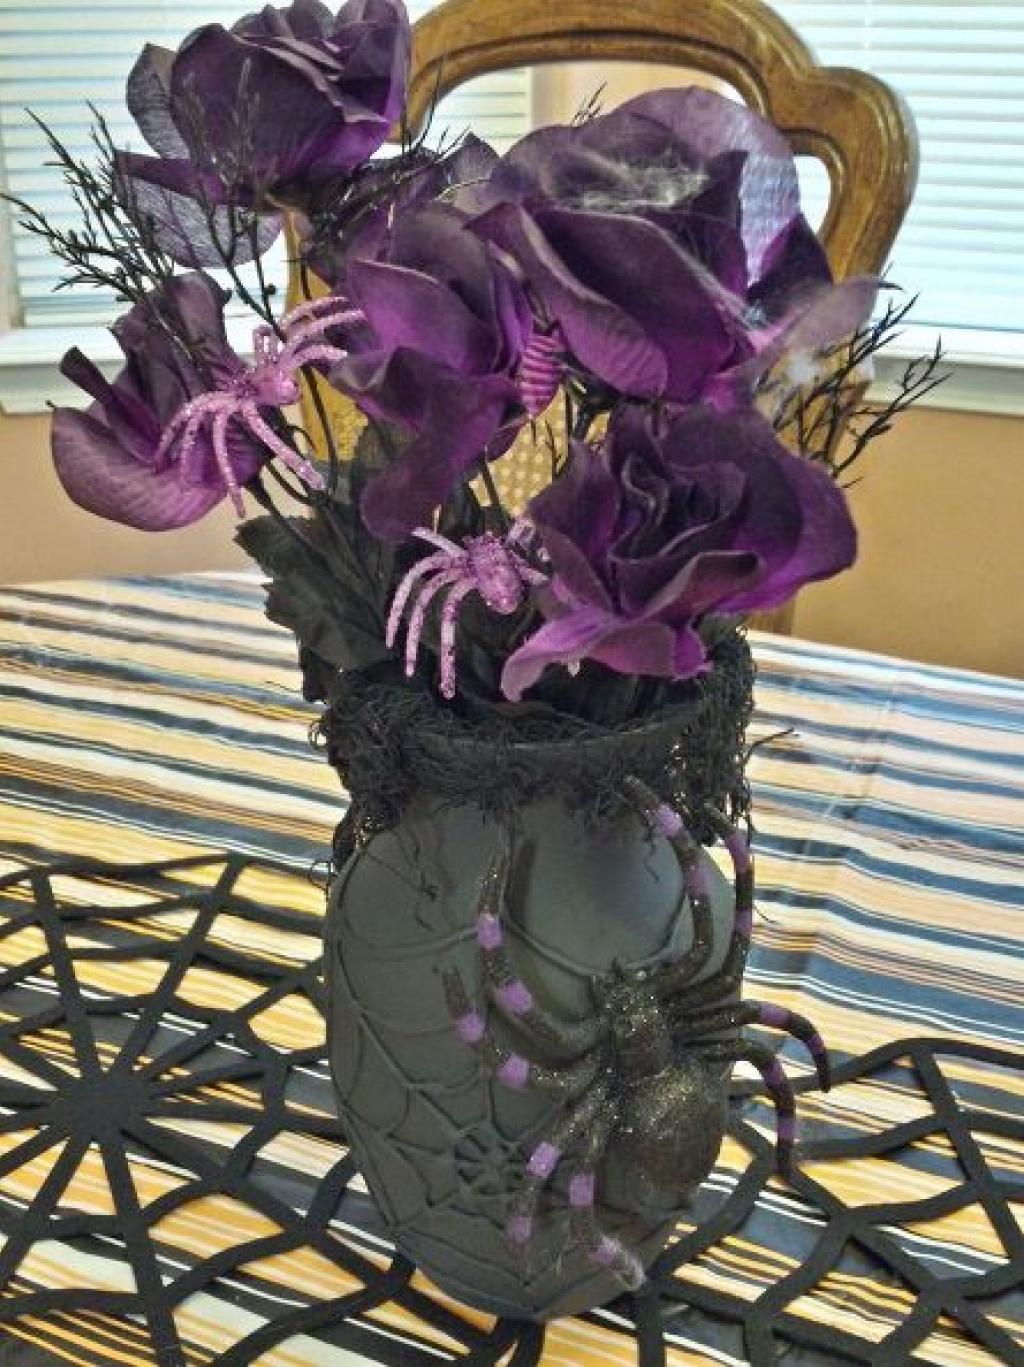 Vase of Spiders for Halloween table decoration.